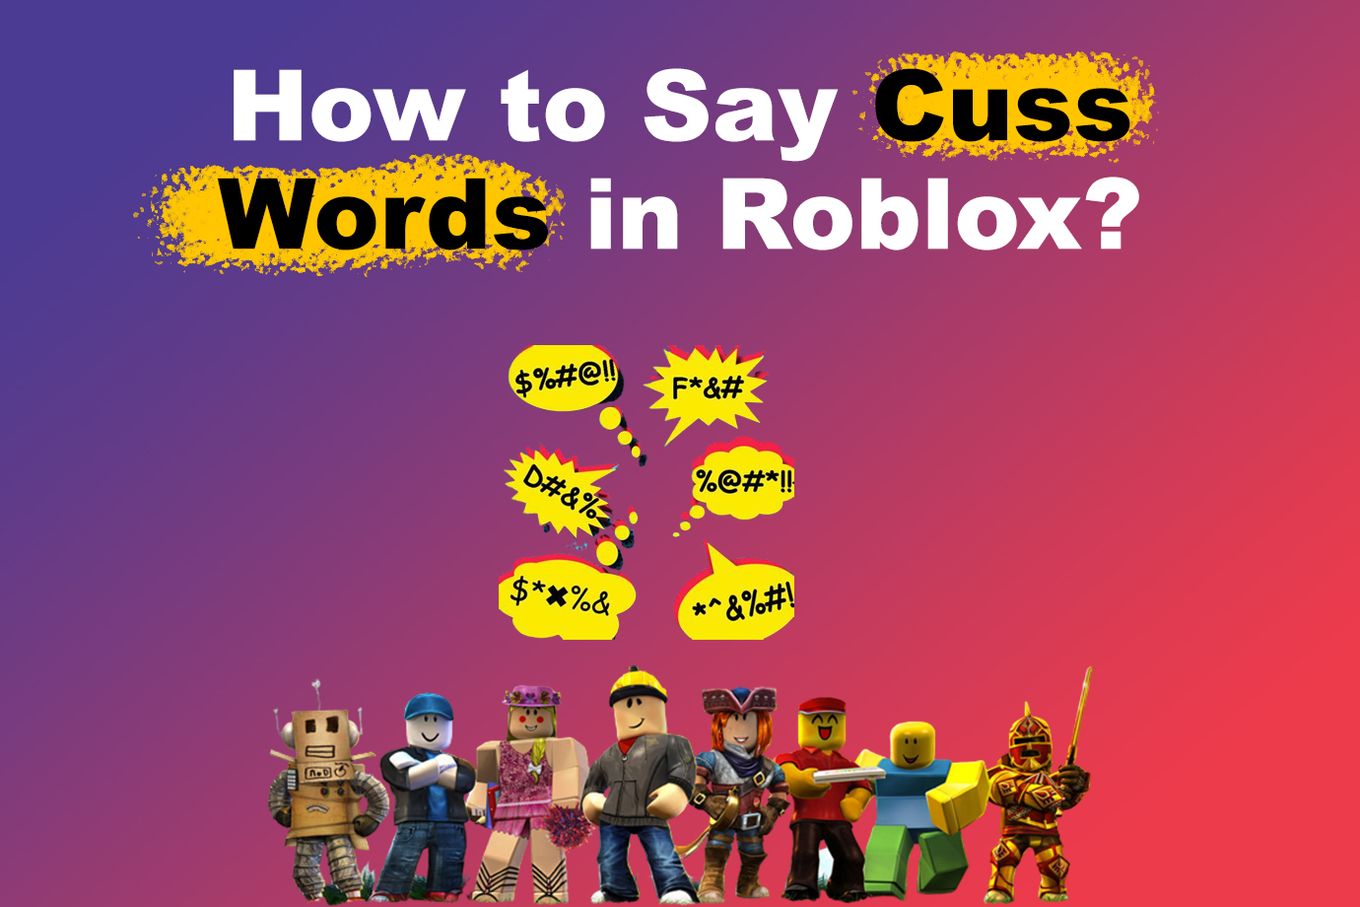 How to Say Cuss Words in Roblox